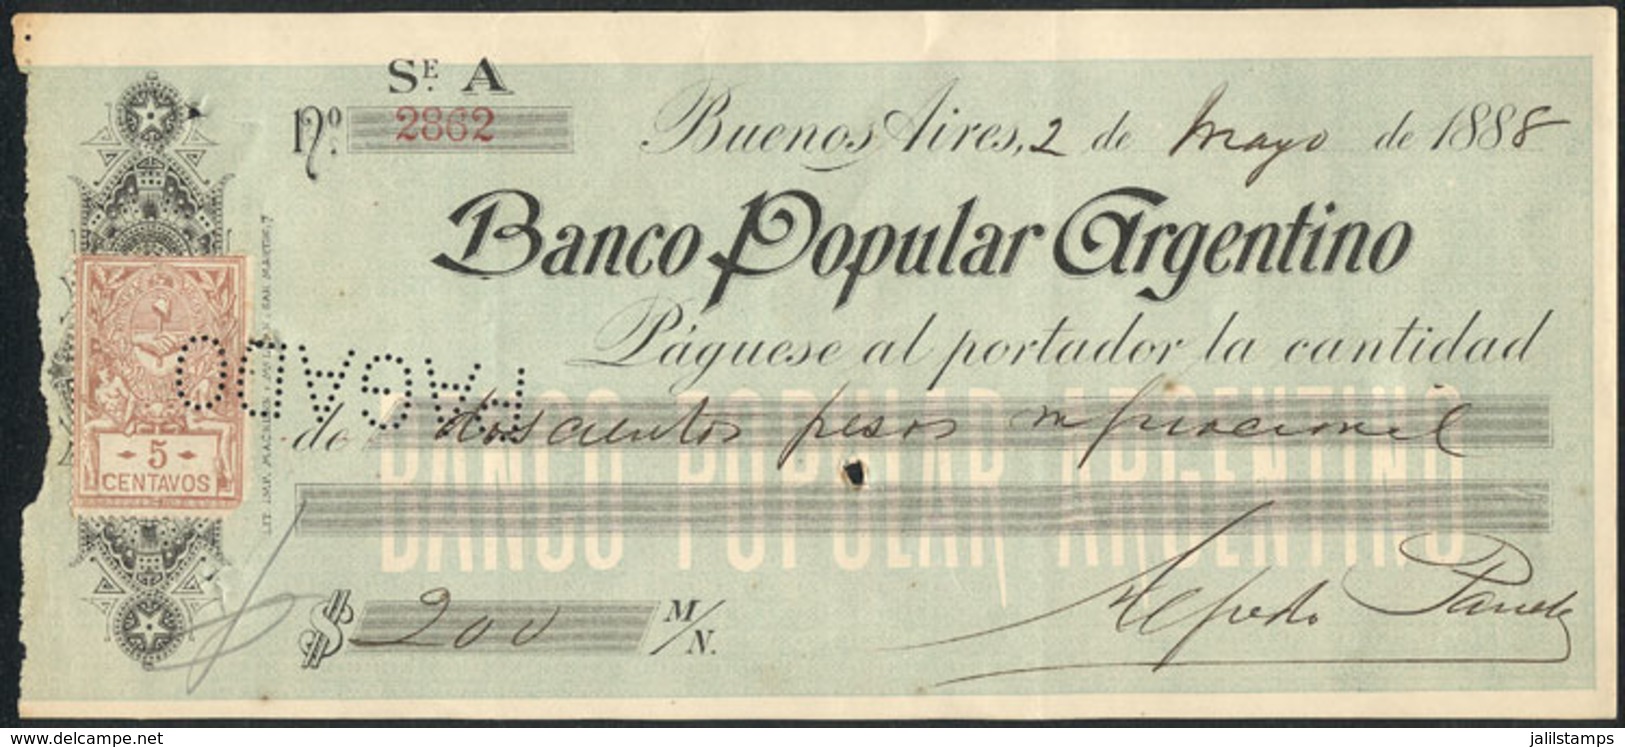 ARGENTINA: Check Of Banco Popular Argentino, Year 1888, With Revenue Stamp Of 5c. Affixed, VF Quality, Rare! - Manuscritos